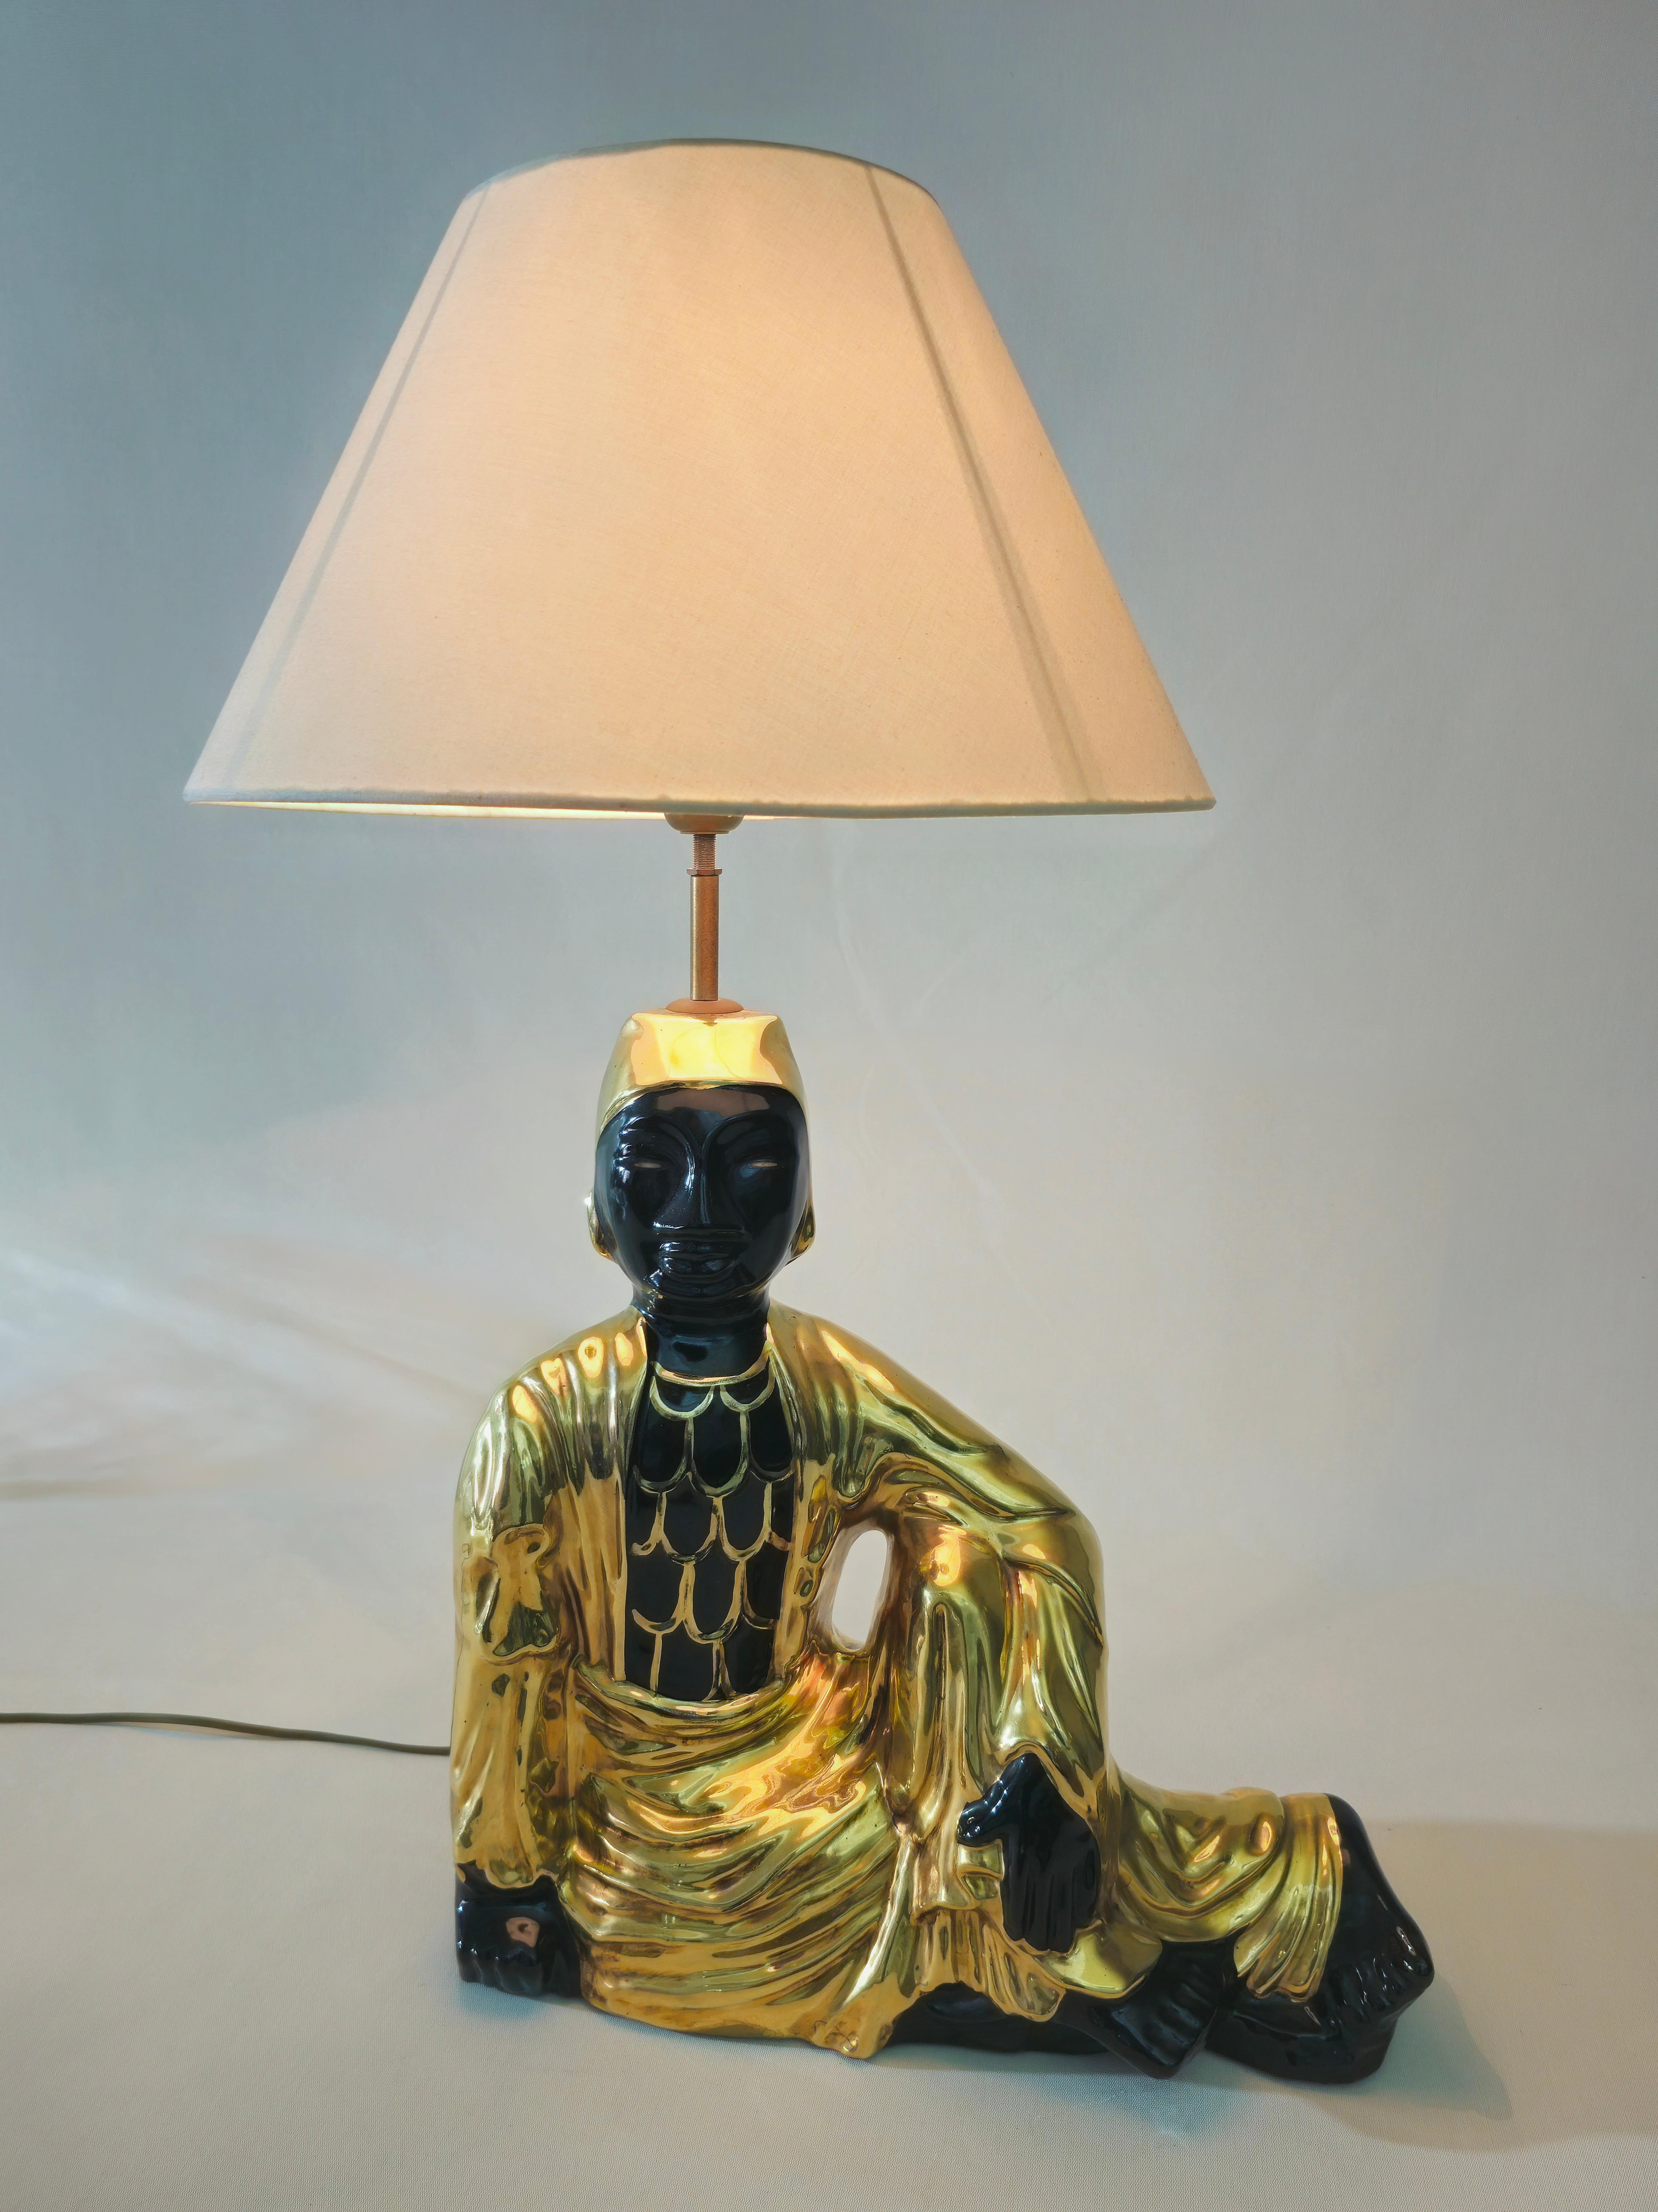 Ceramic Buddha Large Table Lamp Italy 1970s Midcentury For Sale 6